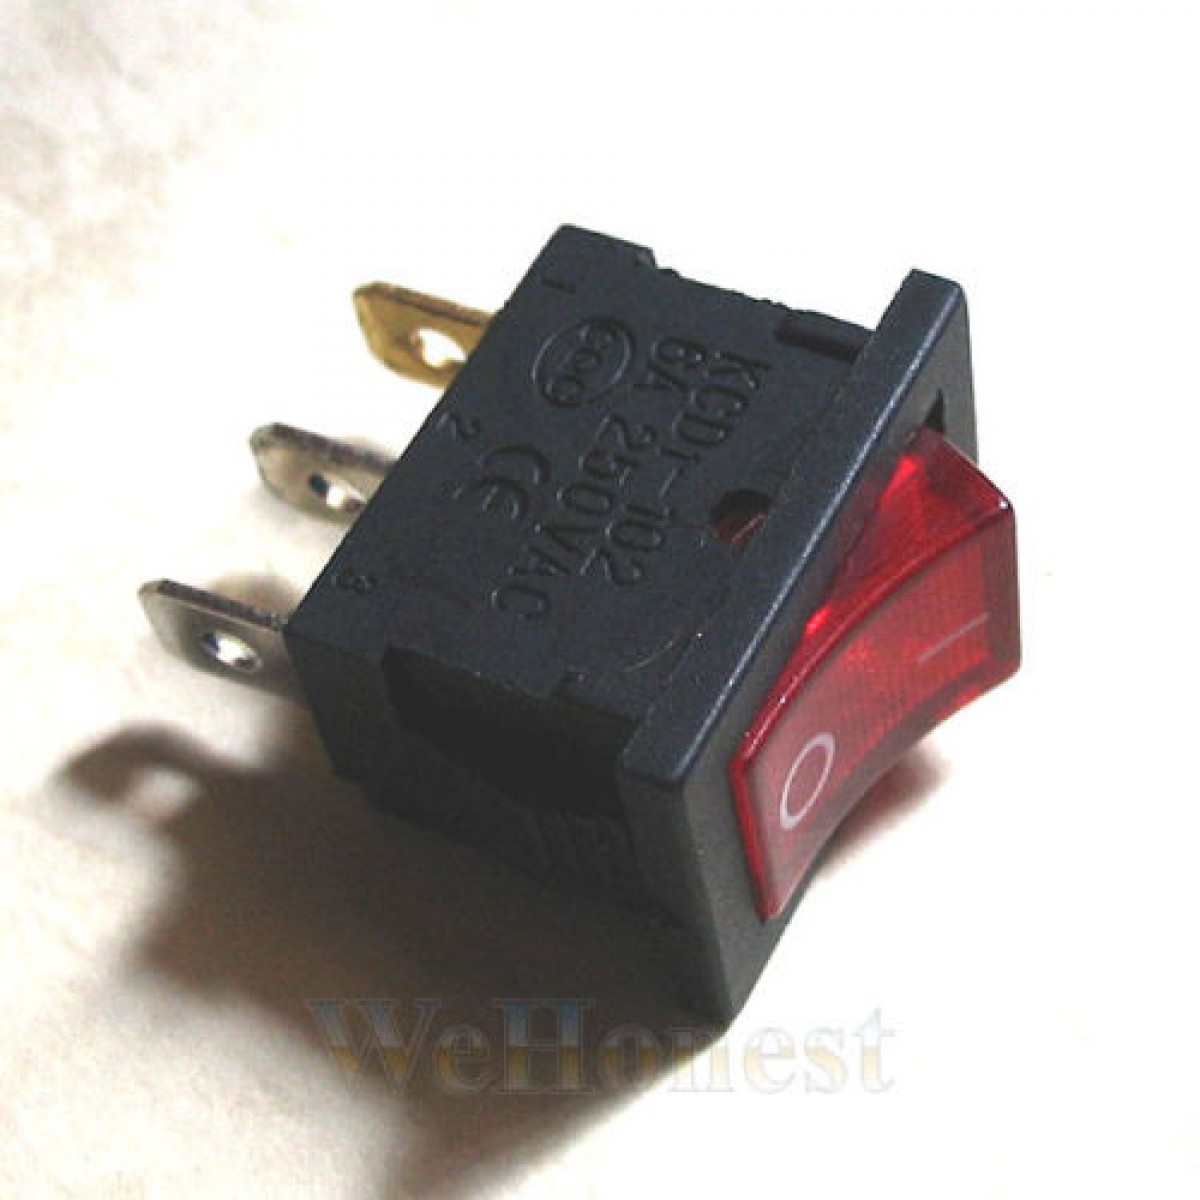 5 x On / Off Rocker Switches SPDT with Light Quality